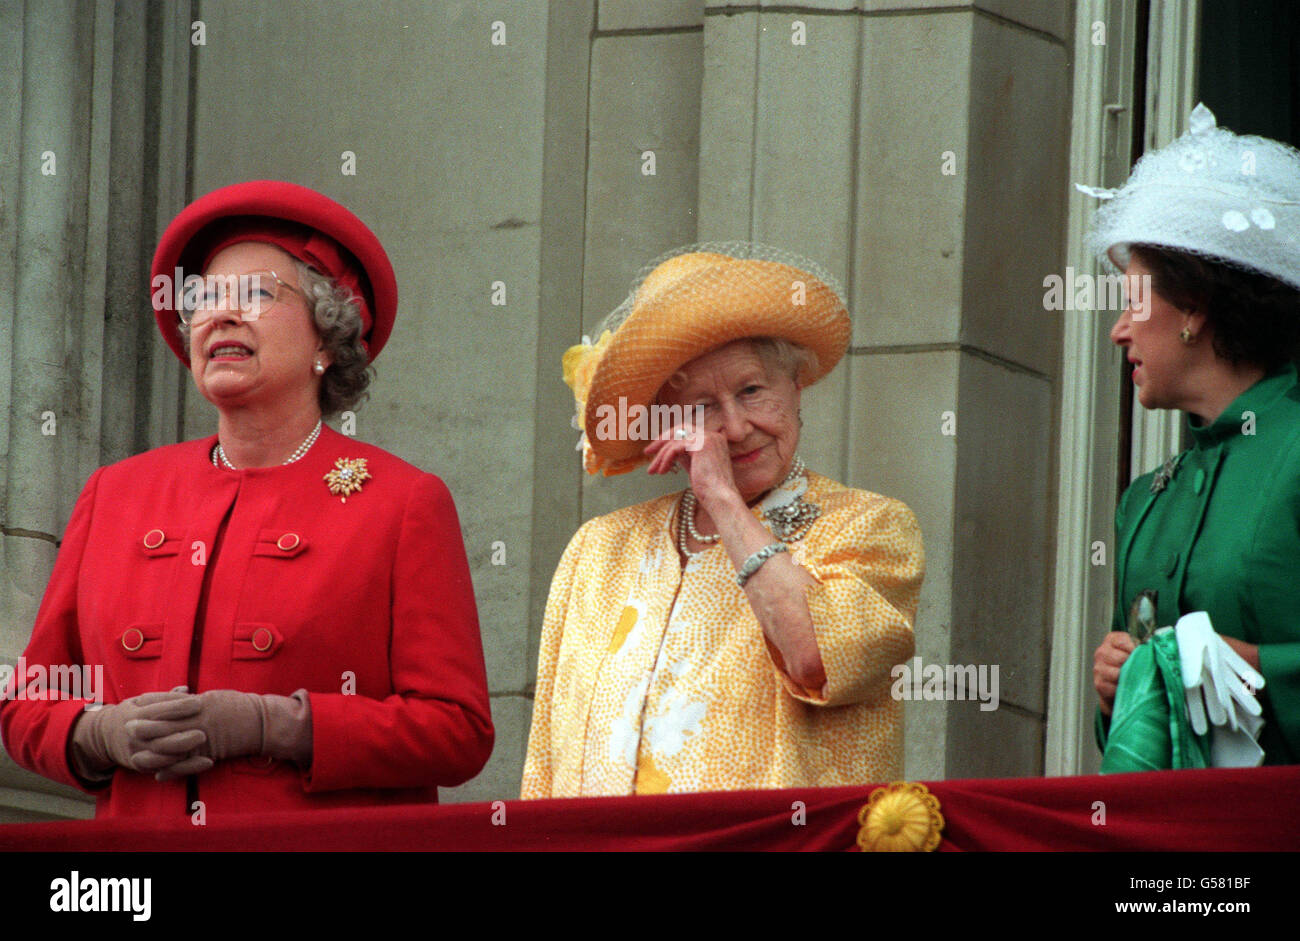 VE DAY 1995: The Queen Mother wipes her eye as she stands on the balcony of Buckingham Palace to greet the thousands of people who had gathered to commemorate the 50th anniversary of VE Day (Victory in Europe Day). Beside her are her daughters, the Queen (left) and Princess Margaret. Stock Photo